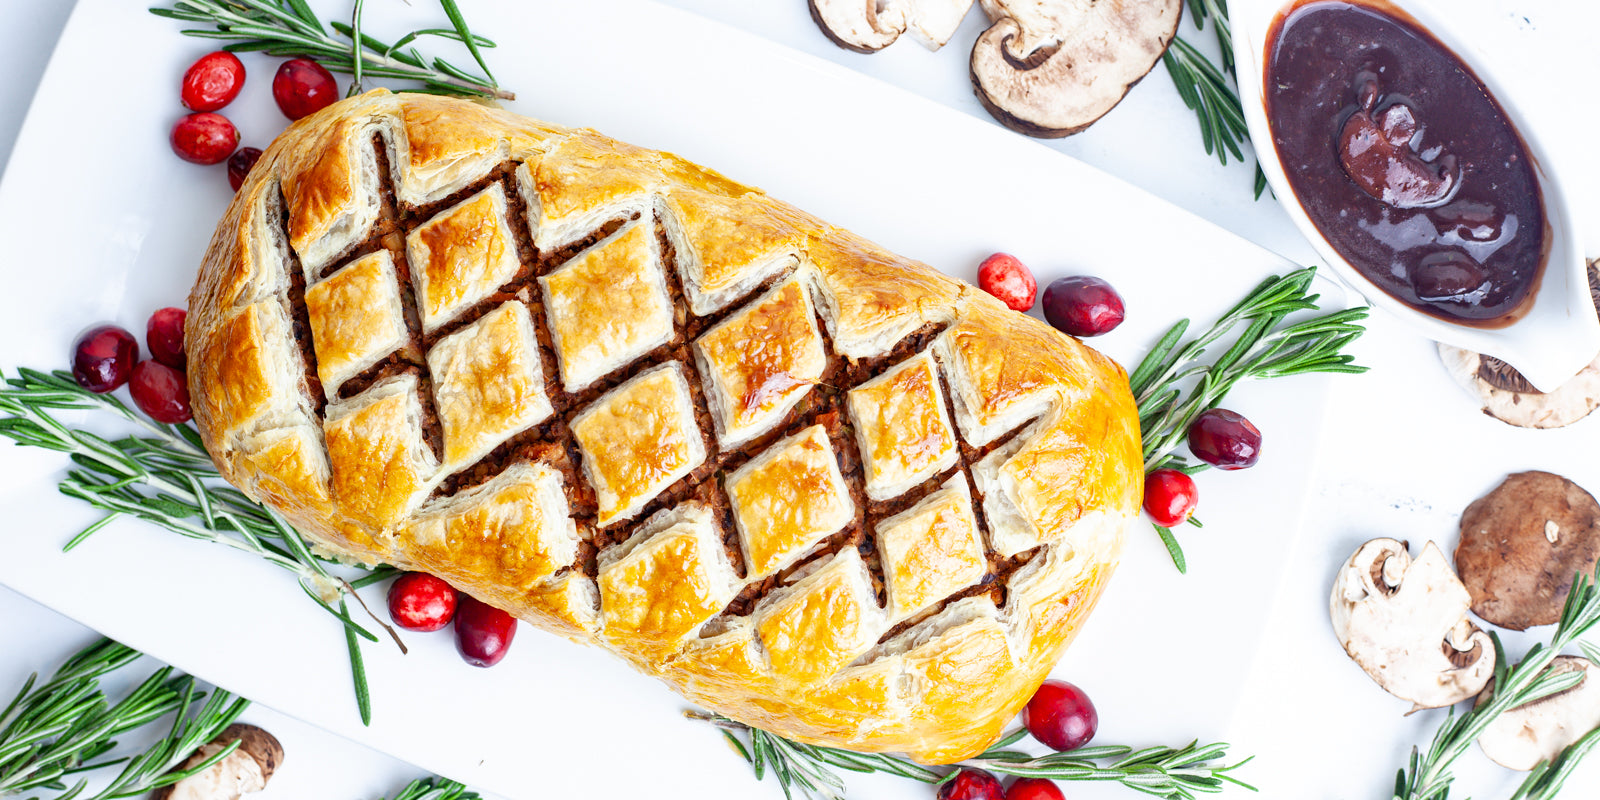 bean wellington with red wine reduction